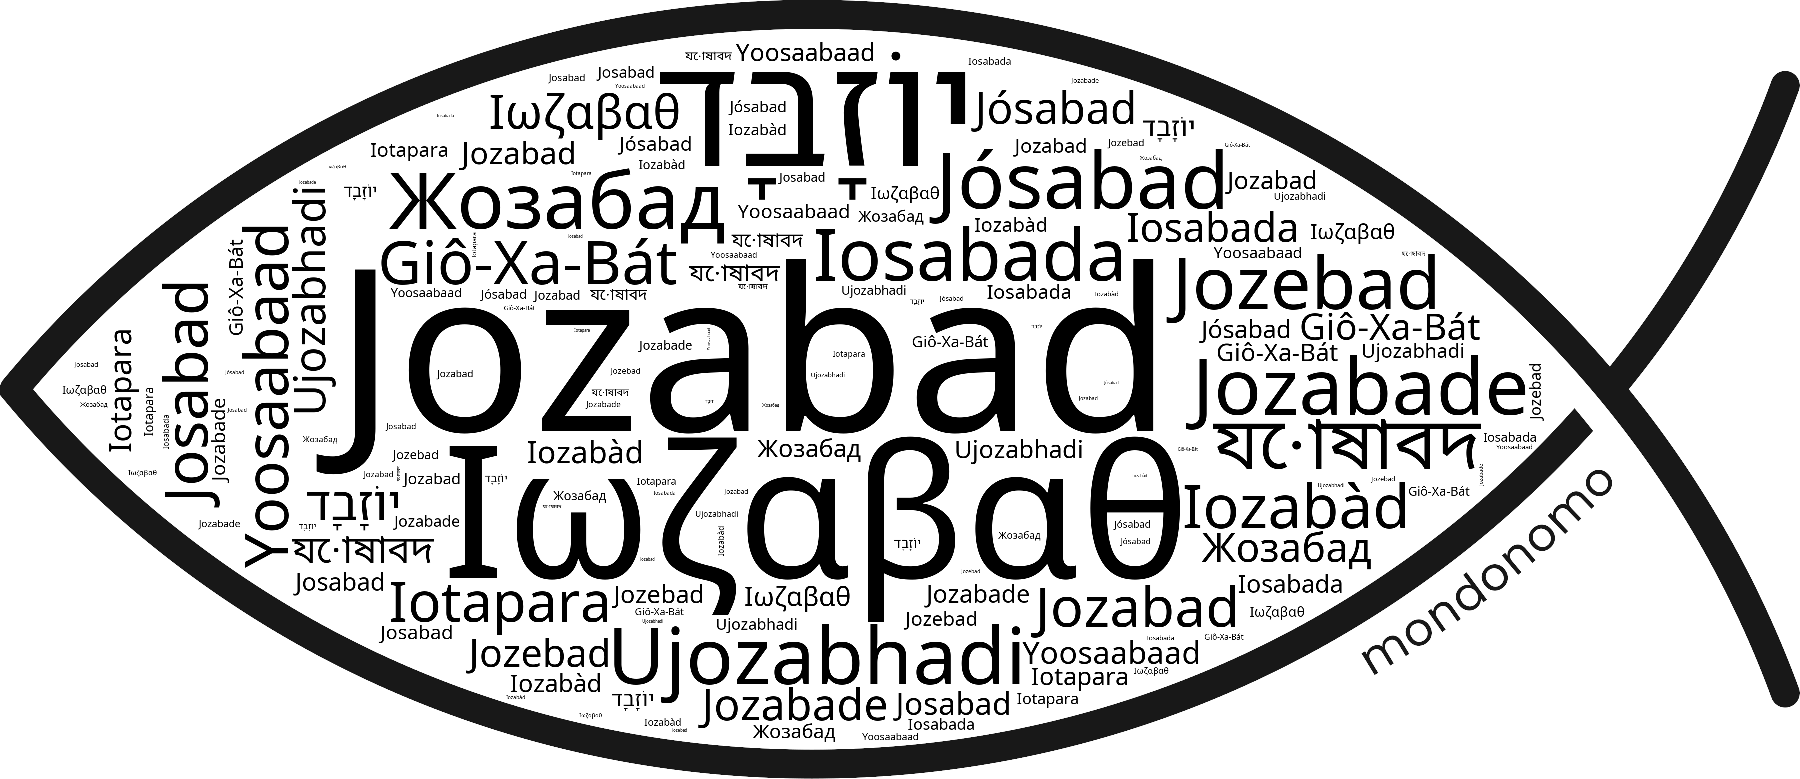 Name Jozabad in the world's Bibles